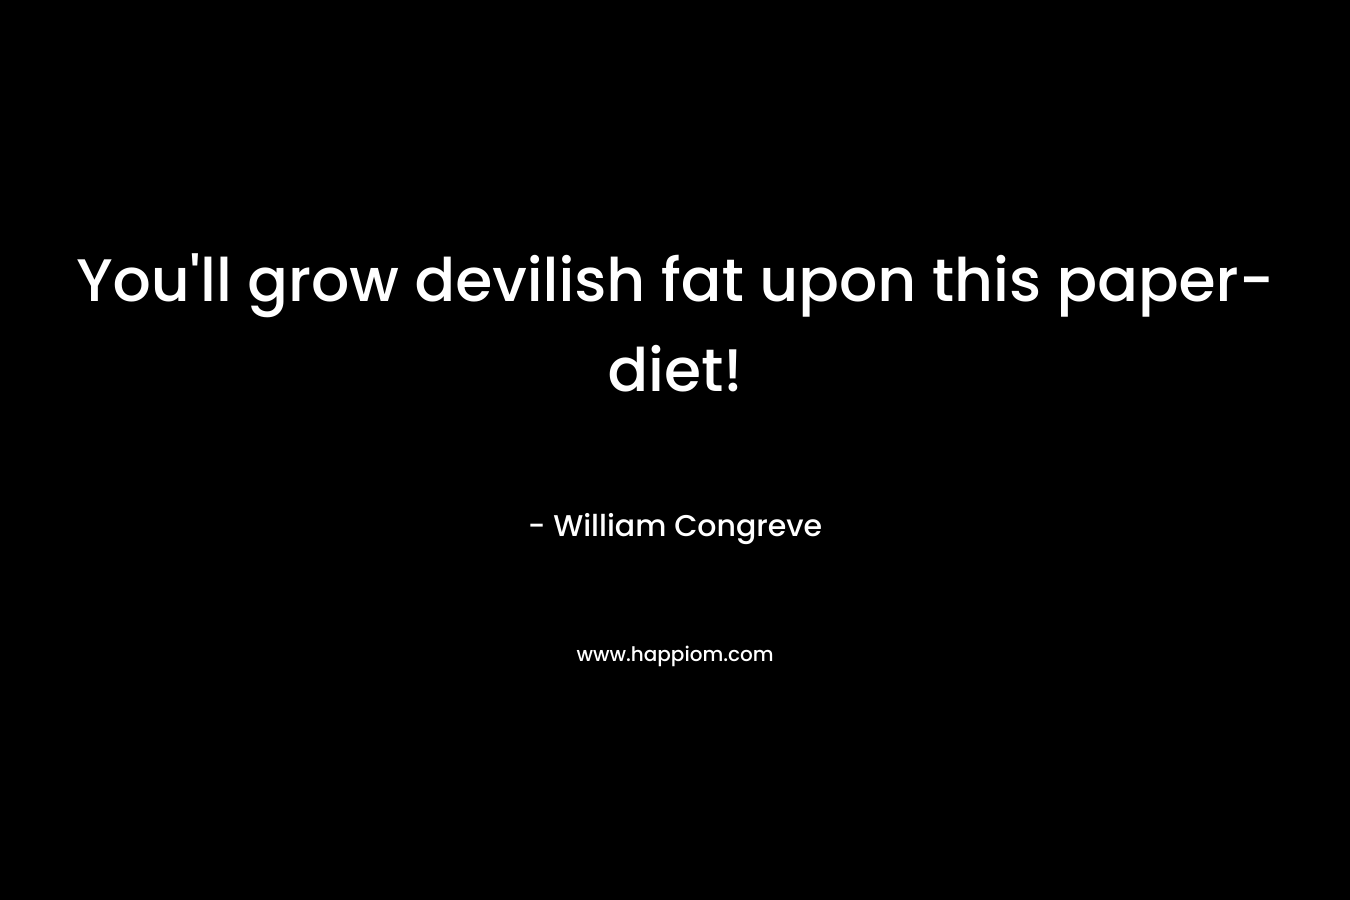 You’ll grow devilish fat upon this paper-diet! – William Congreve